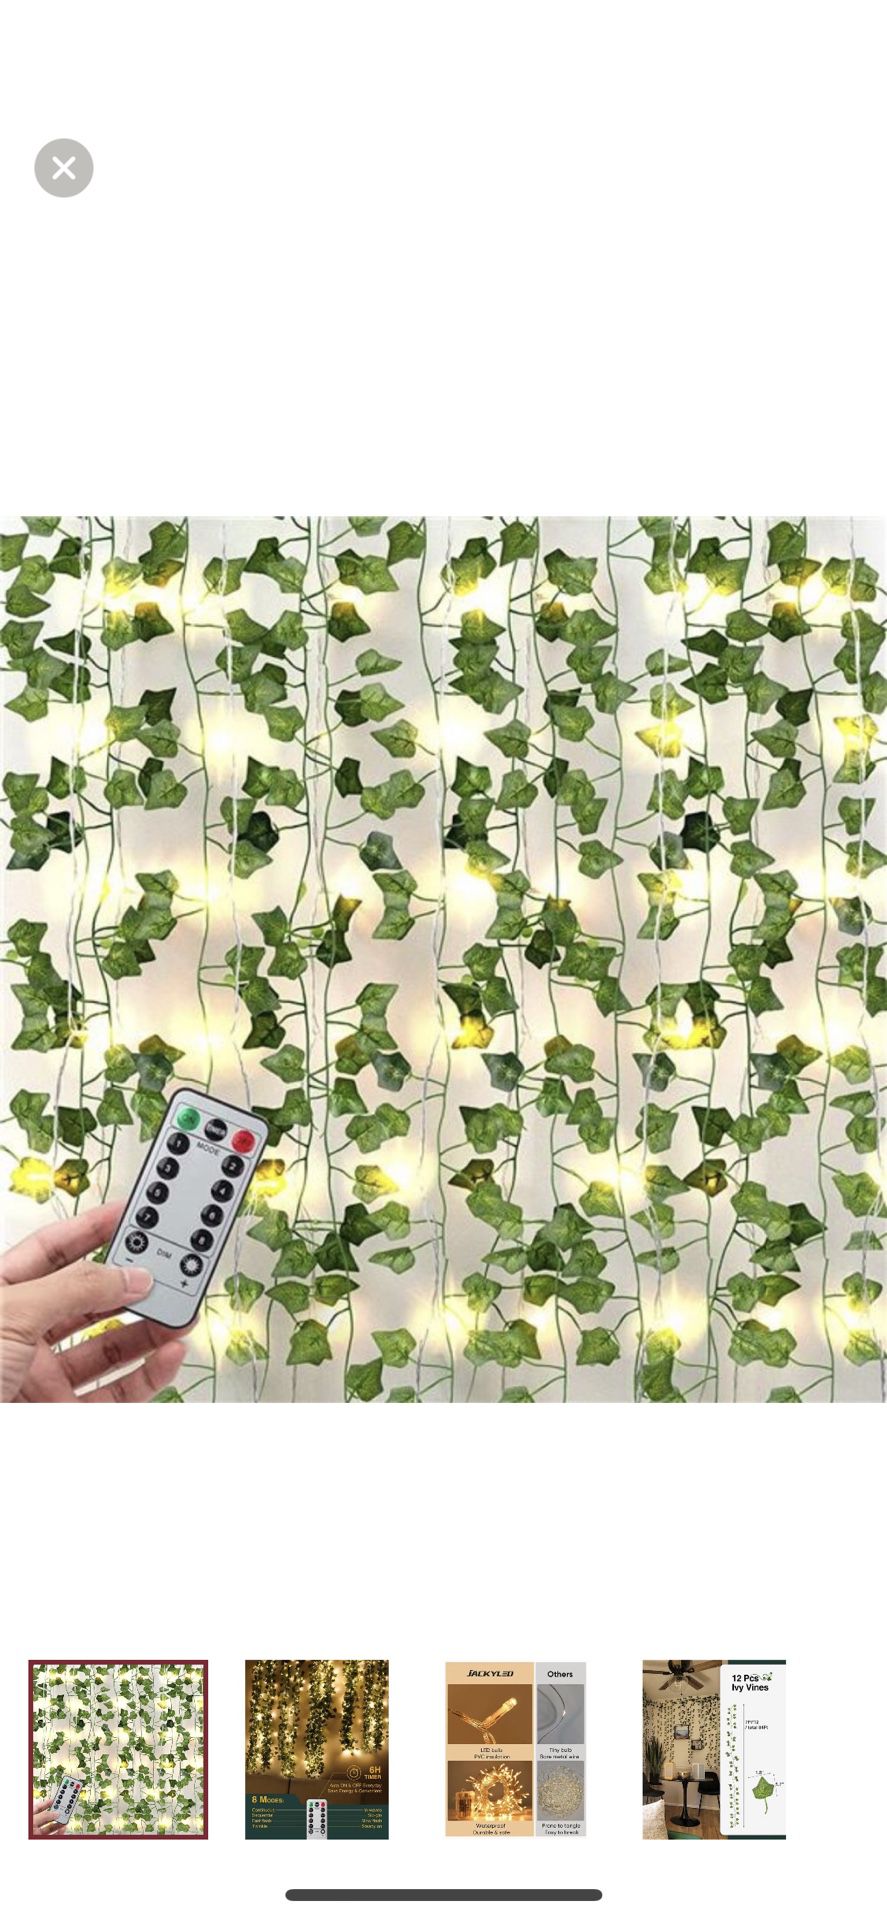 84Ft 12 Pack Artificial Ivy Garland Fake Plants, Ivy Leaves with 80 LED Lights